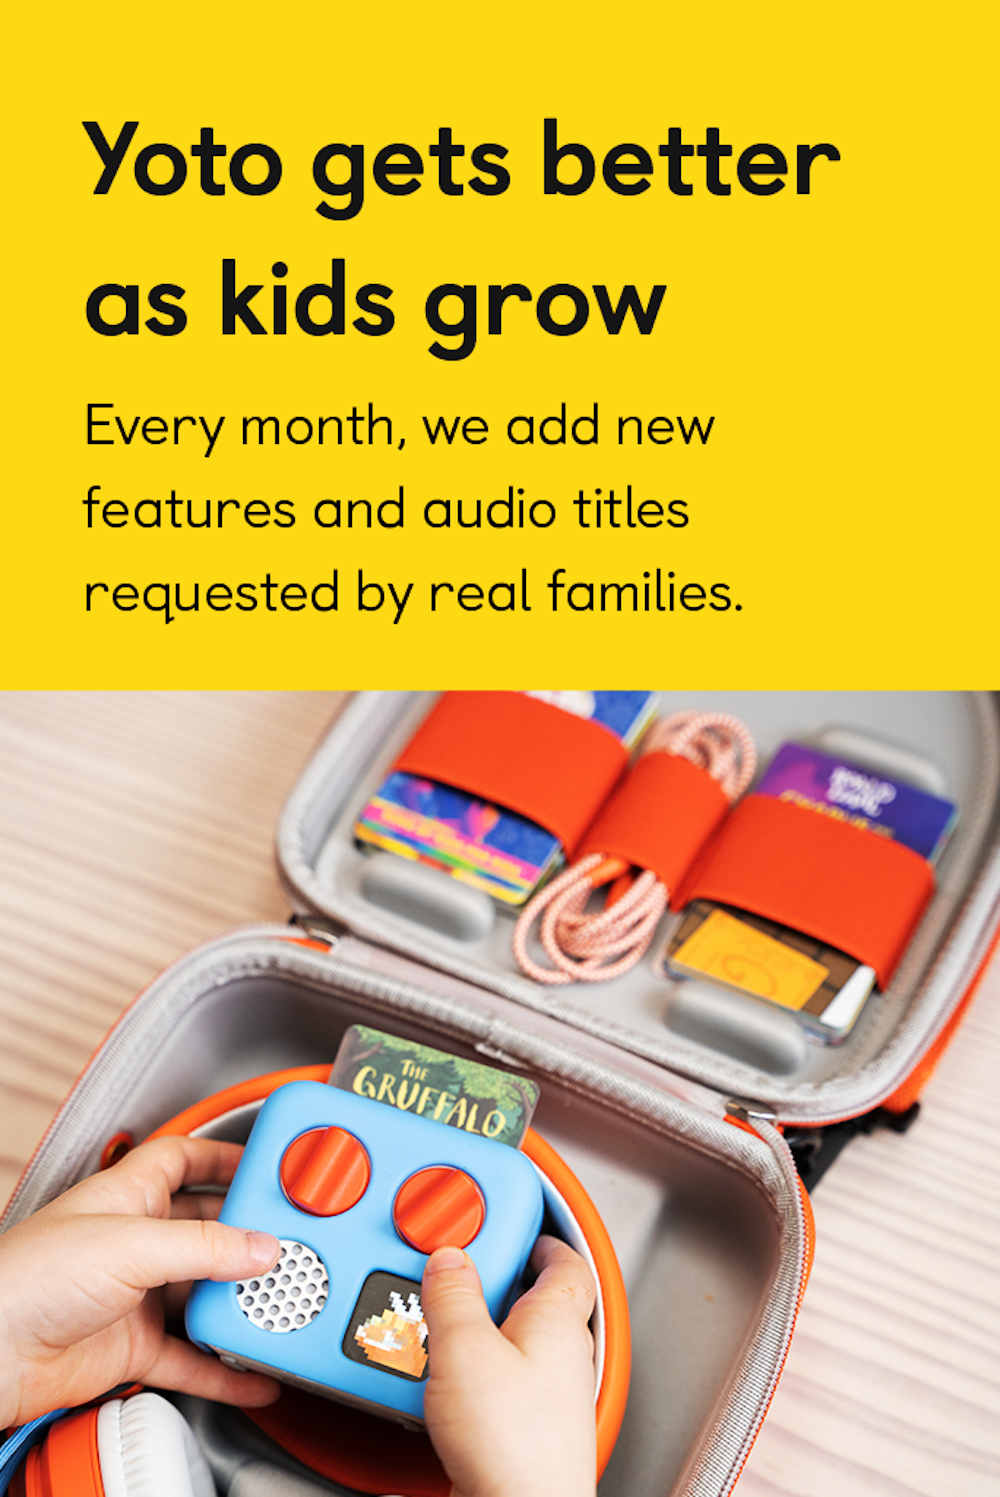 Yoto gets better as kids grow. Every month, we add new features and audio titles requested by real families.